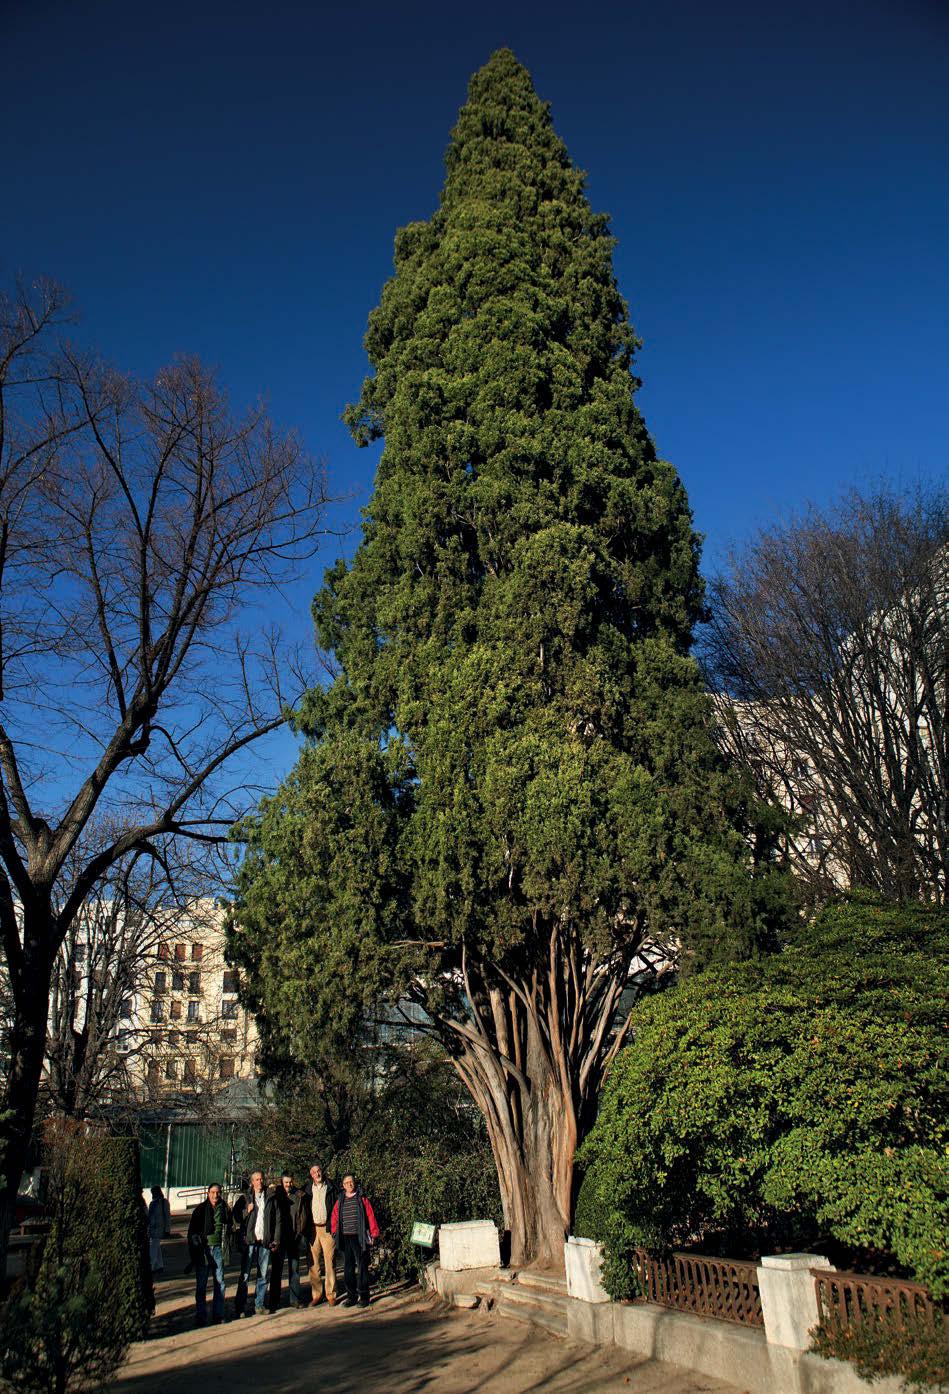 The oldest tree in the Botanical Garden is this cypress of 32 metres high, which is between 220 and 240 years old.